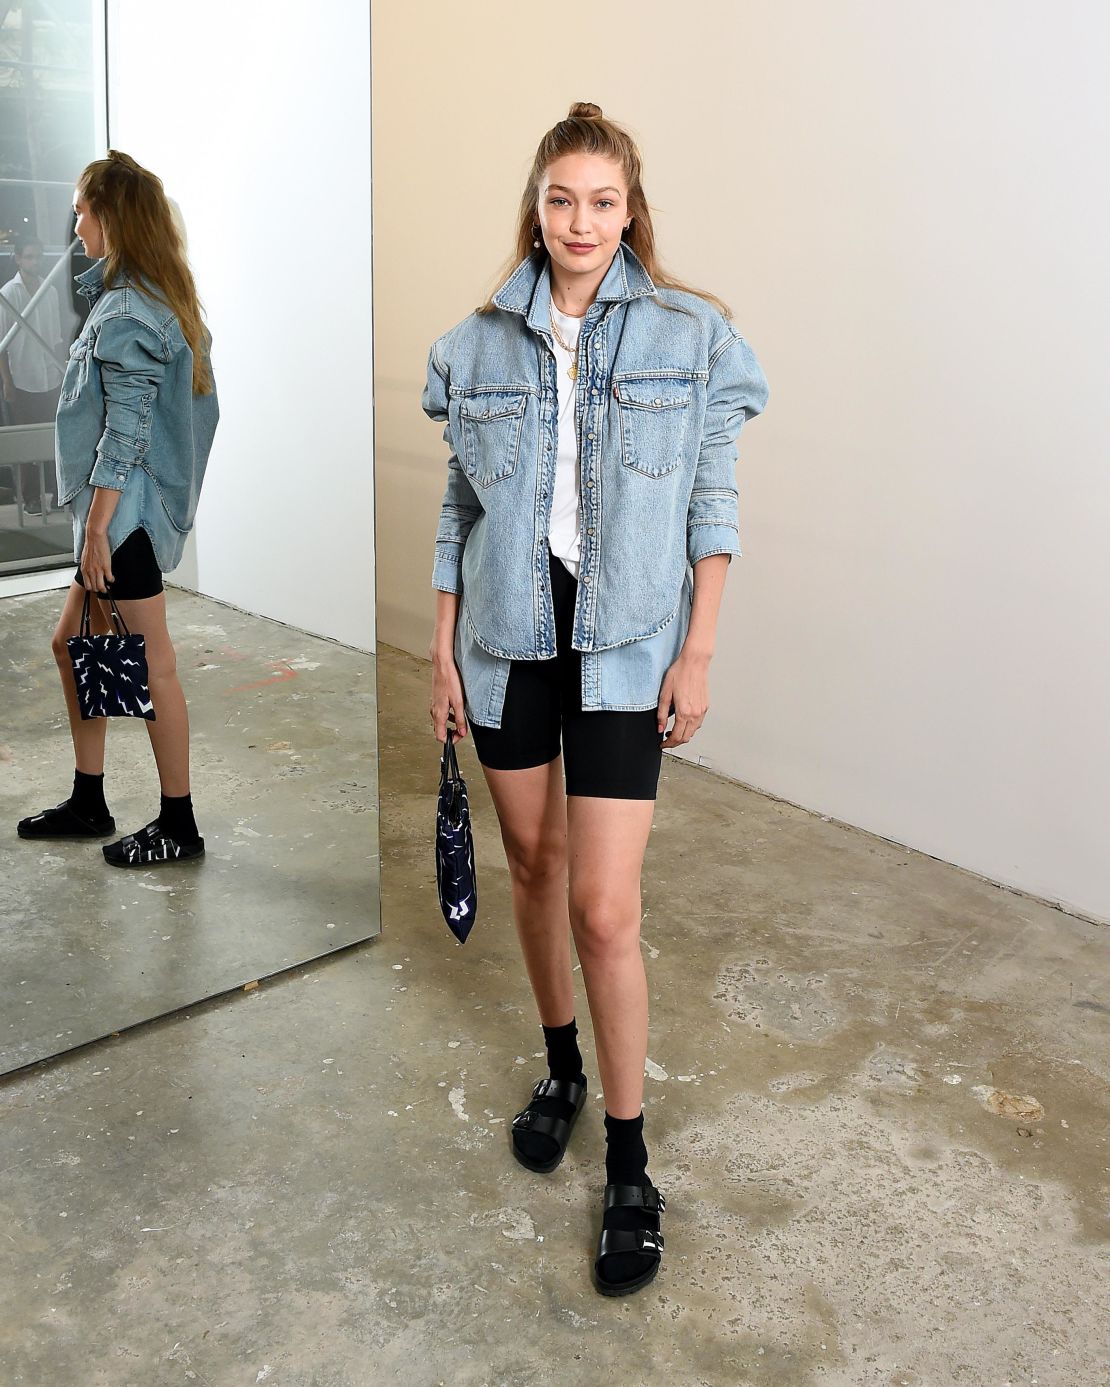 Teens Are Favoring the Streetwear Trend